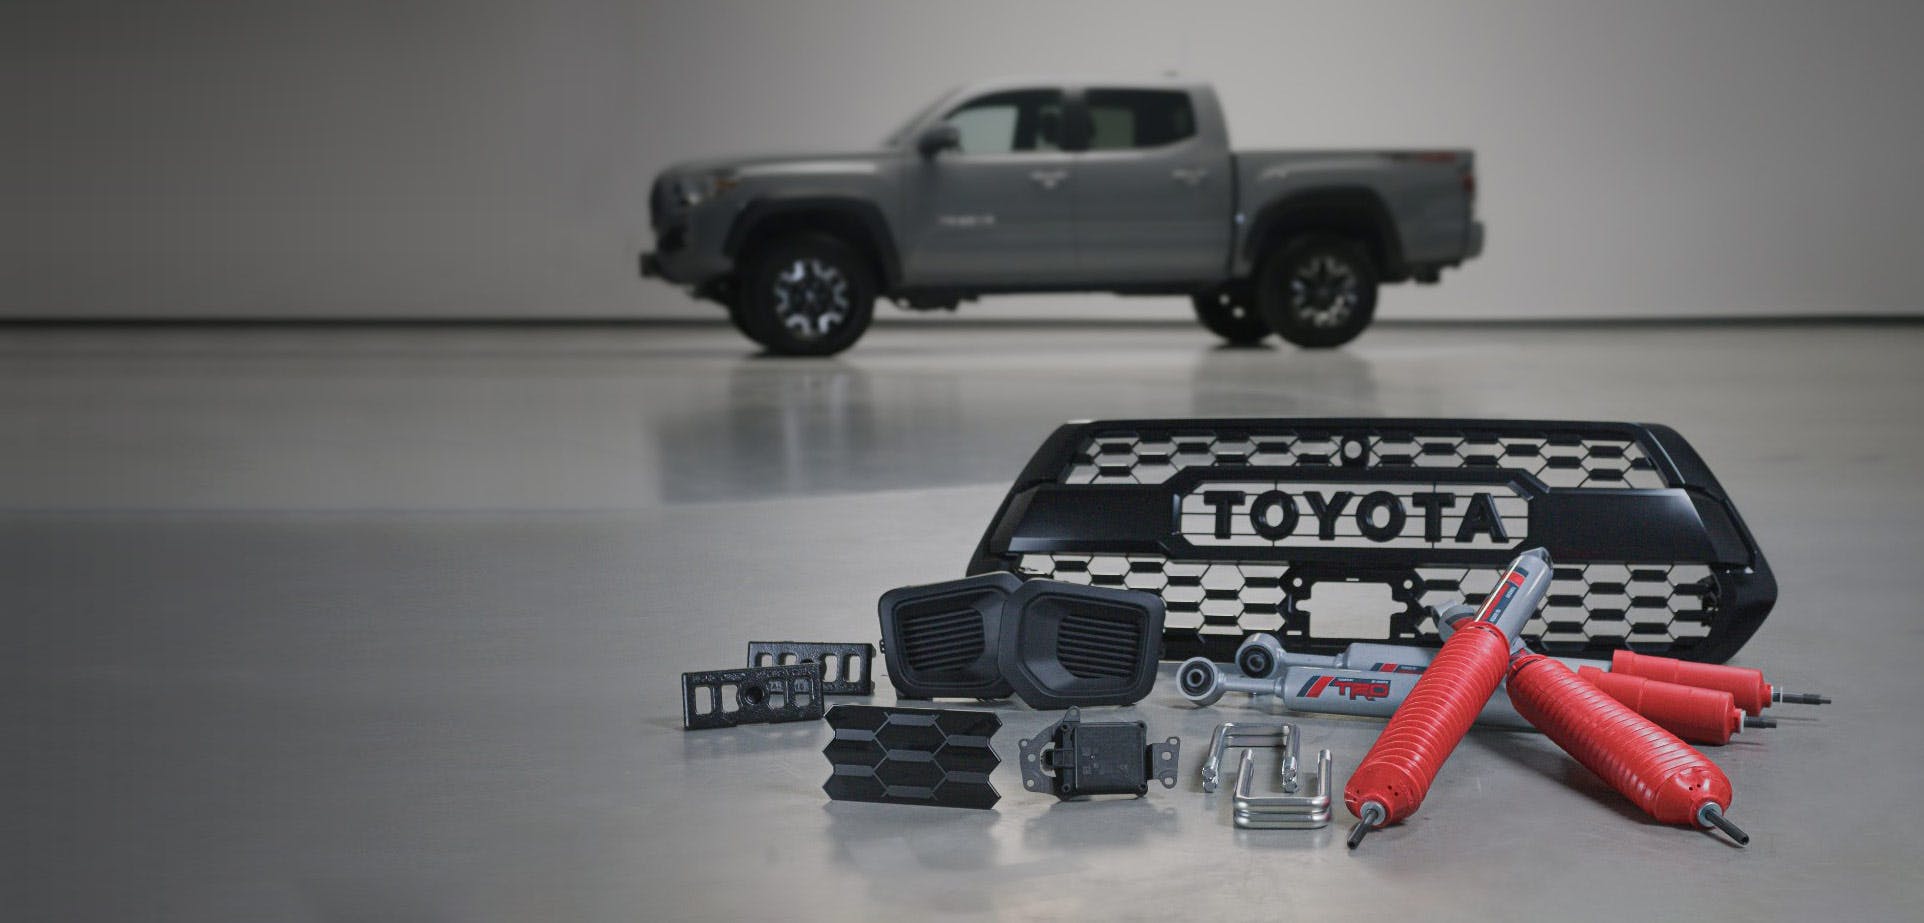 Toyota parts and truck.